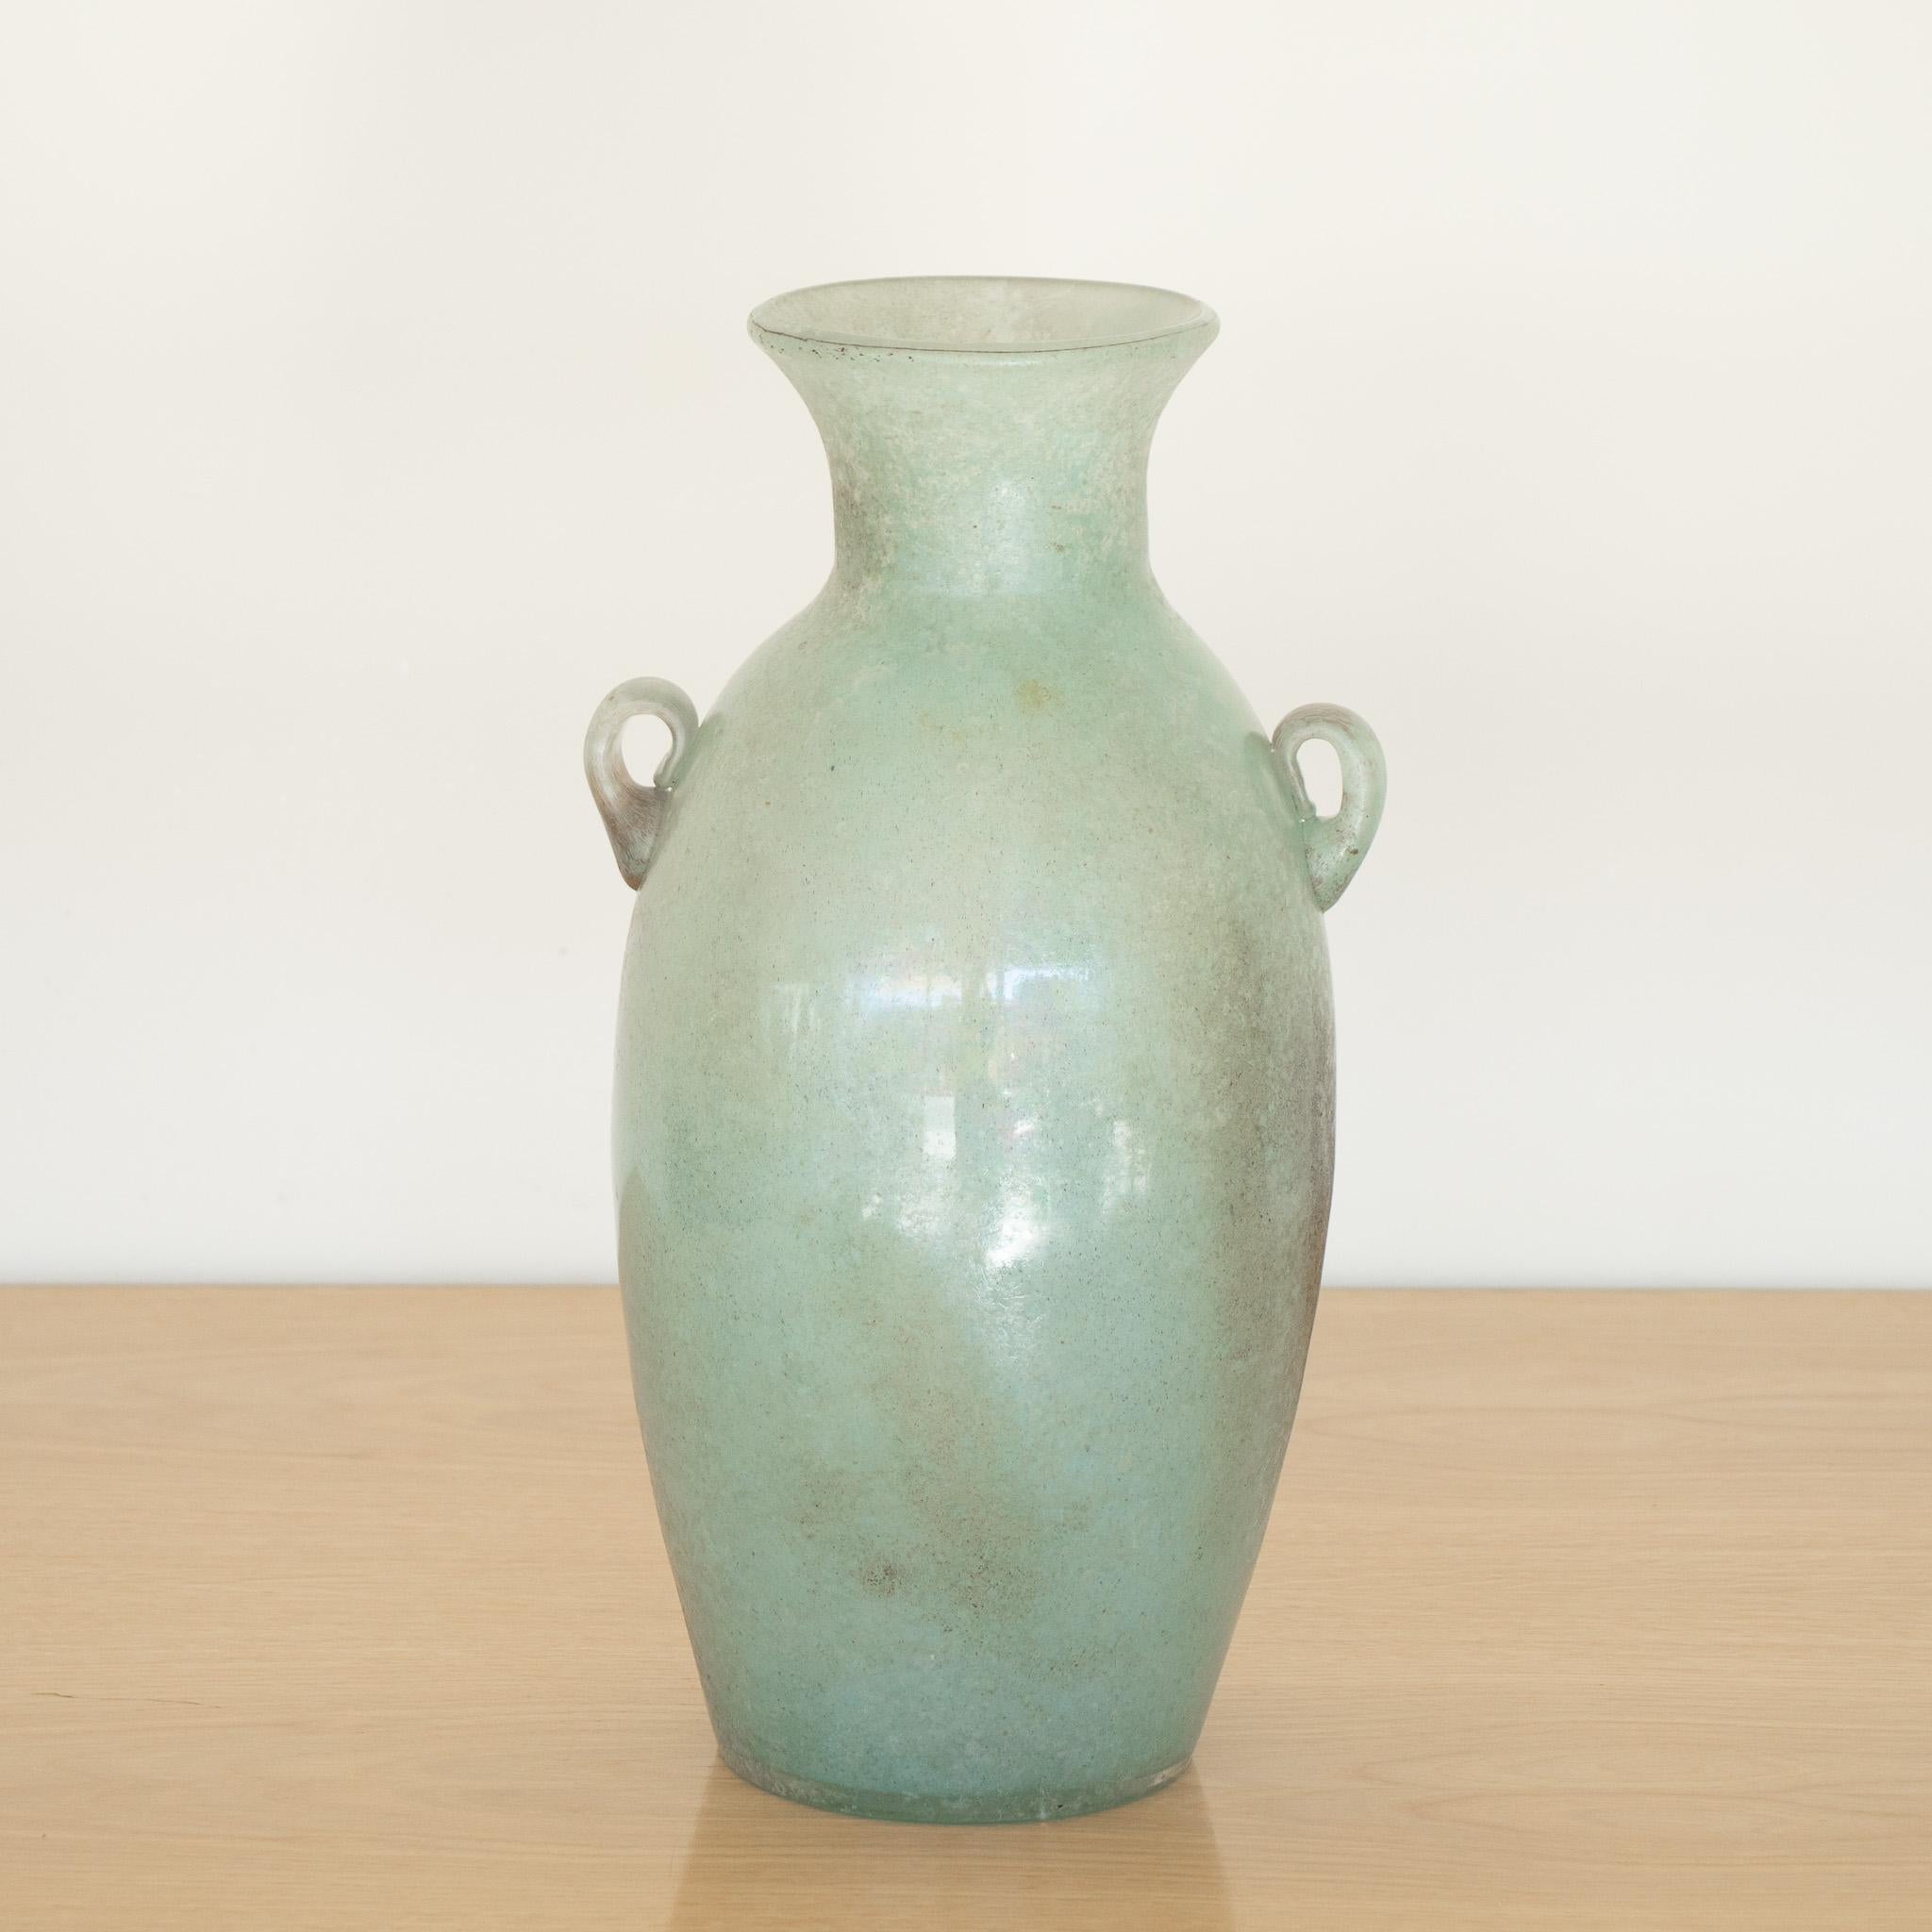 Beautiful vintage Italian Scavo vase made of frosted light green glass. Amphora shape with small glass handles. 